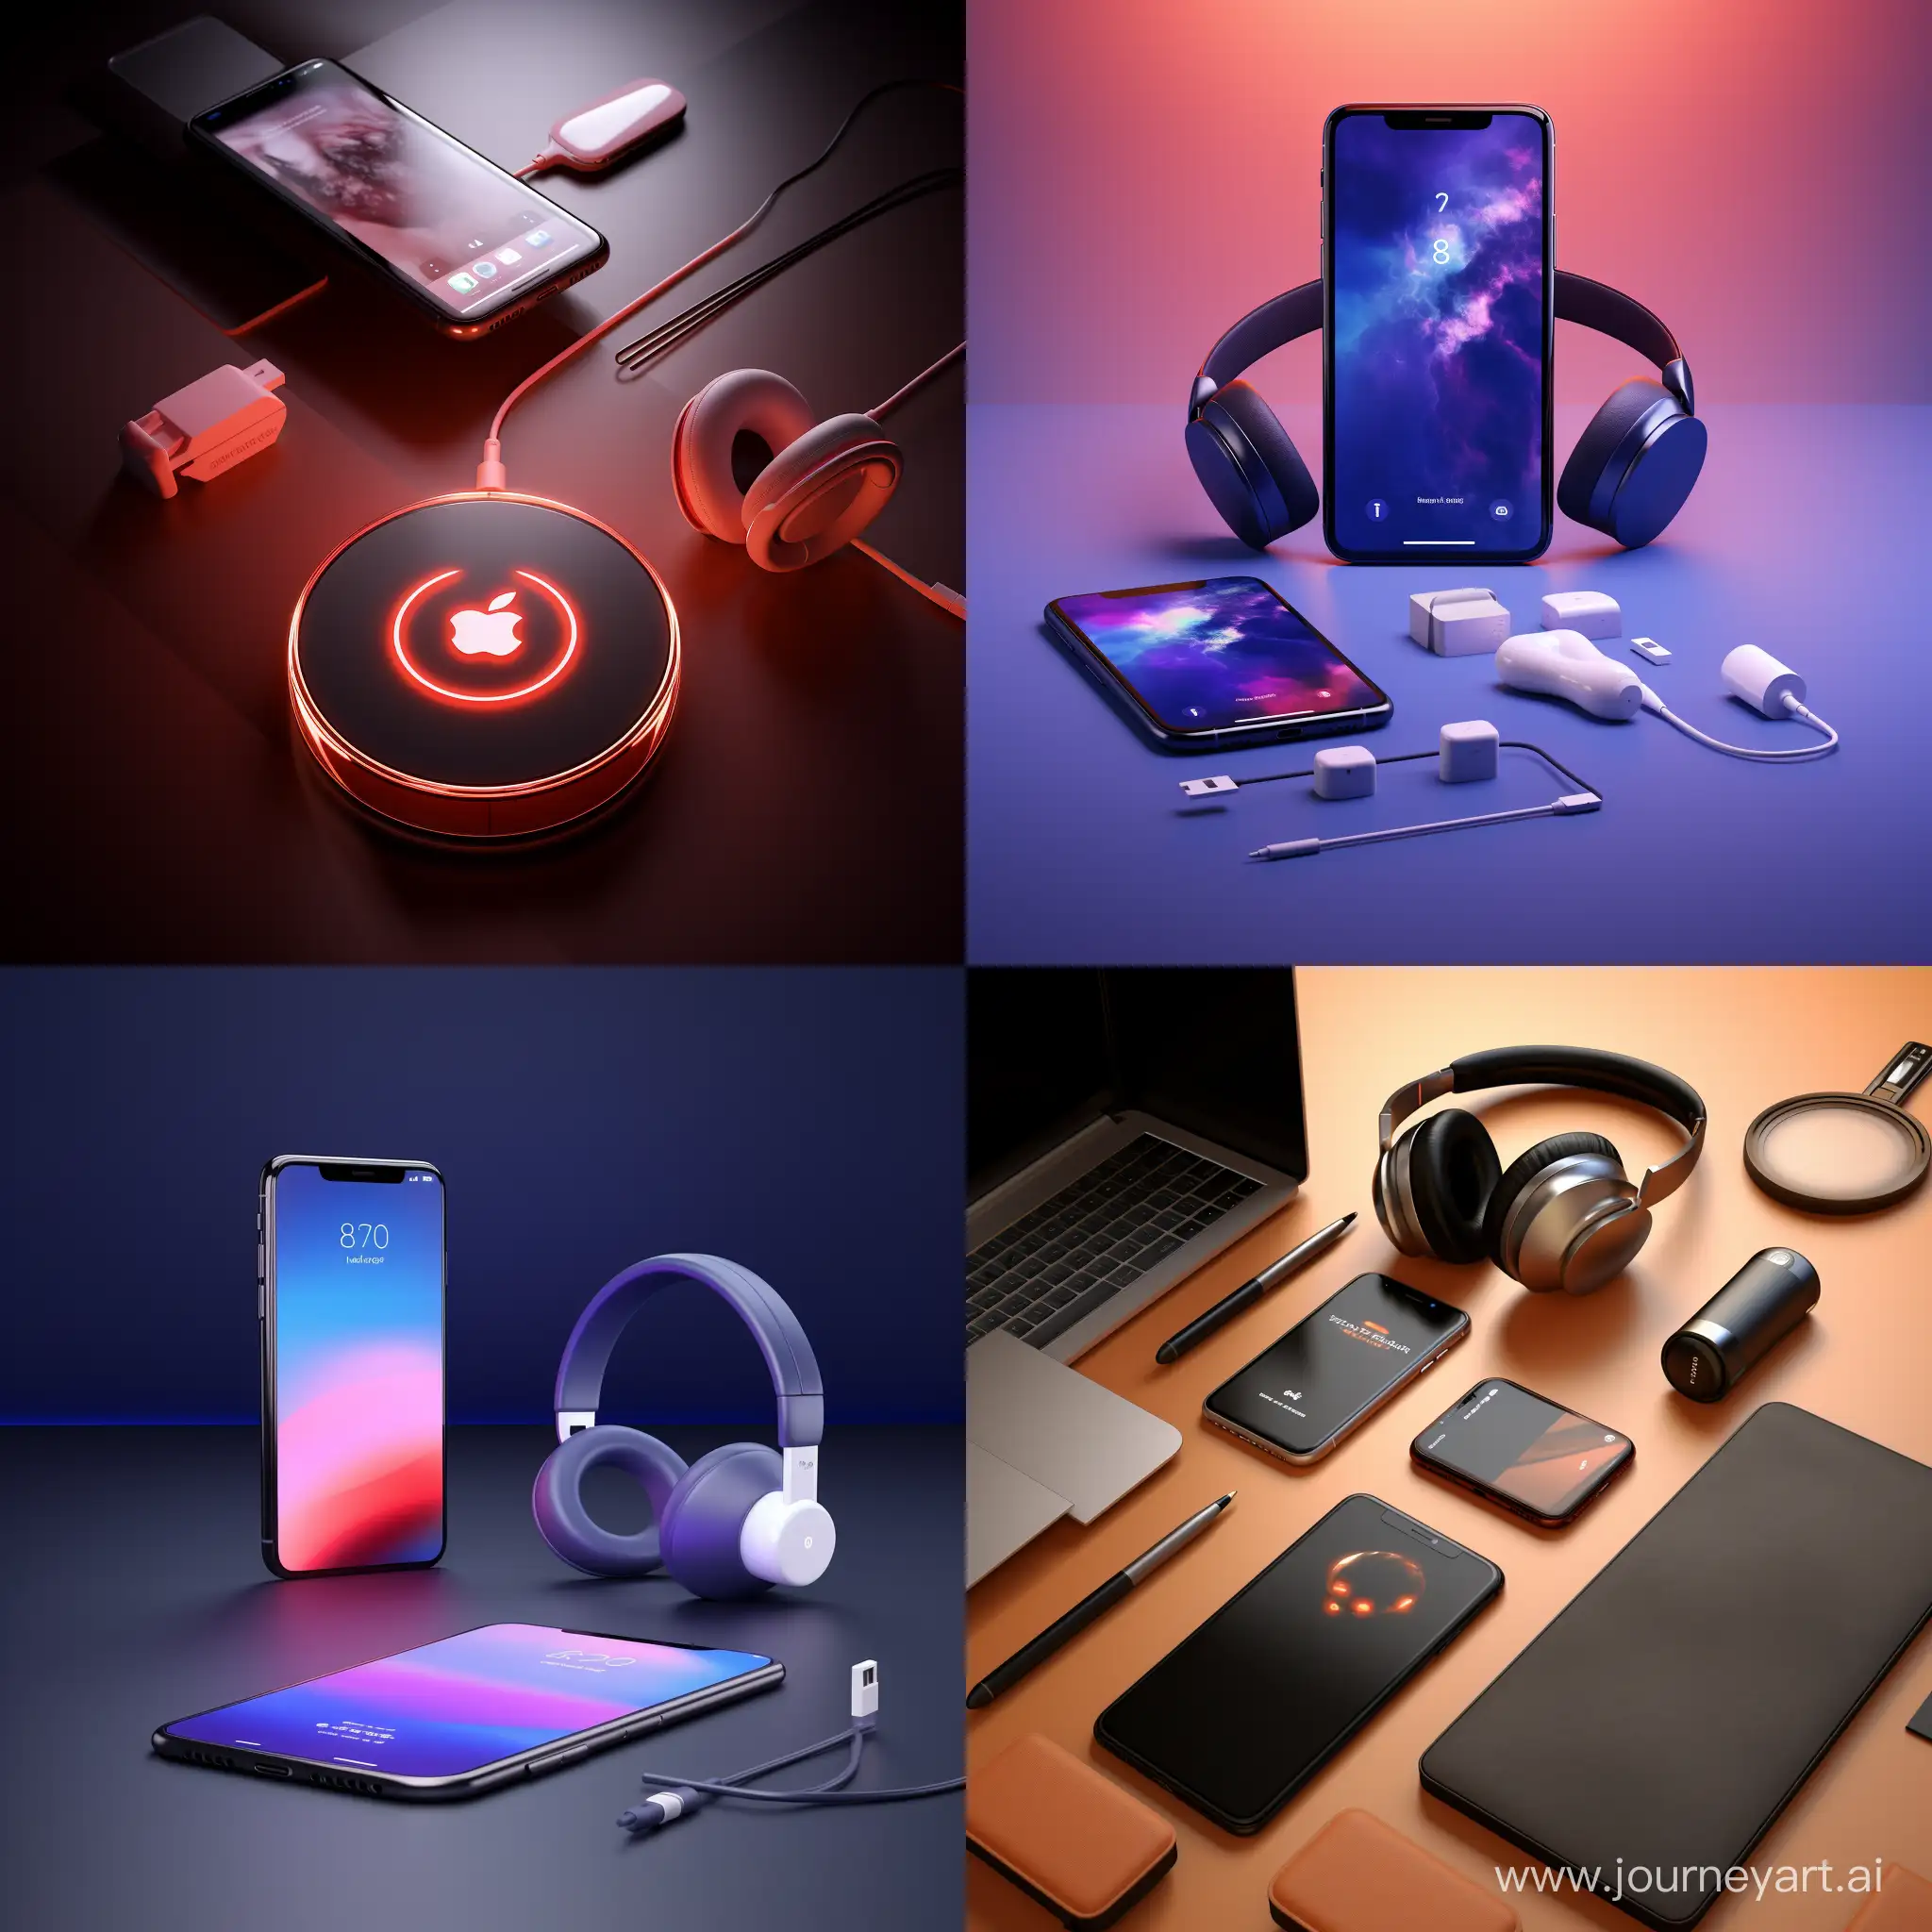 Design a logo and use mobile, headphone, AirPod, smartwatch, charger cable, micro USB, realistic, Square in 16:9, Minimal